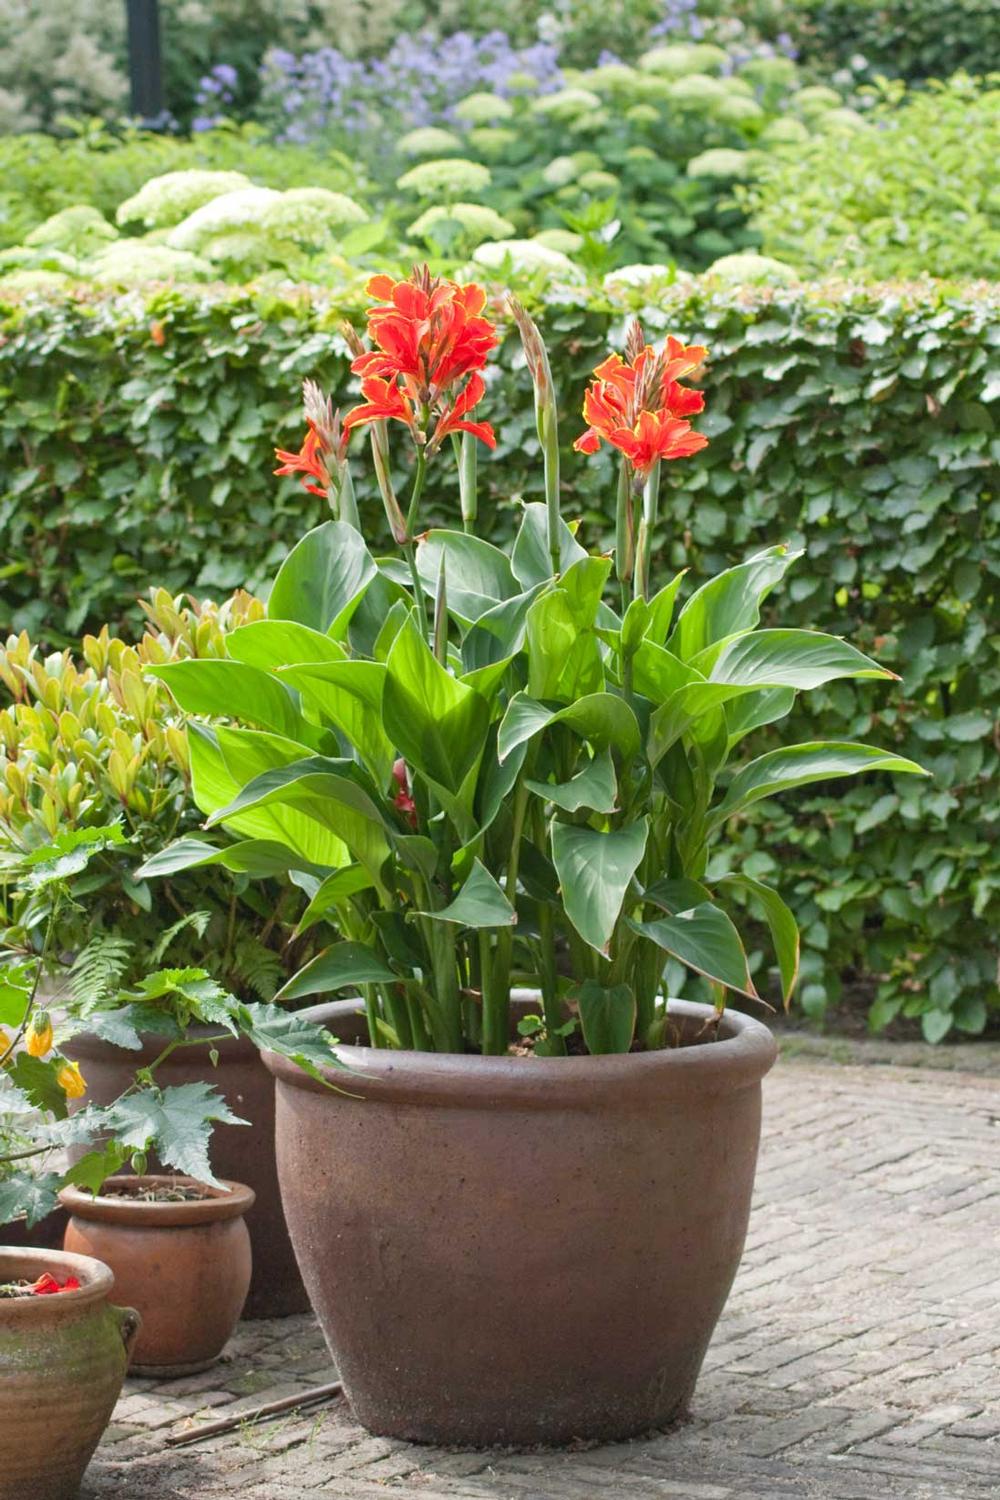 design-tips-for-growing-summer-bulbs-in-containers2.jpg